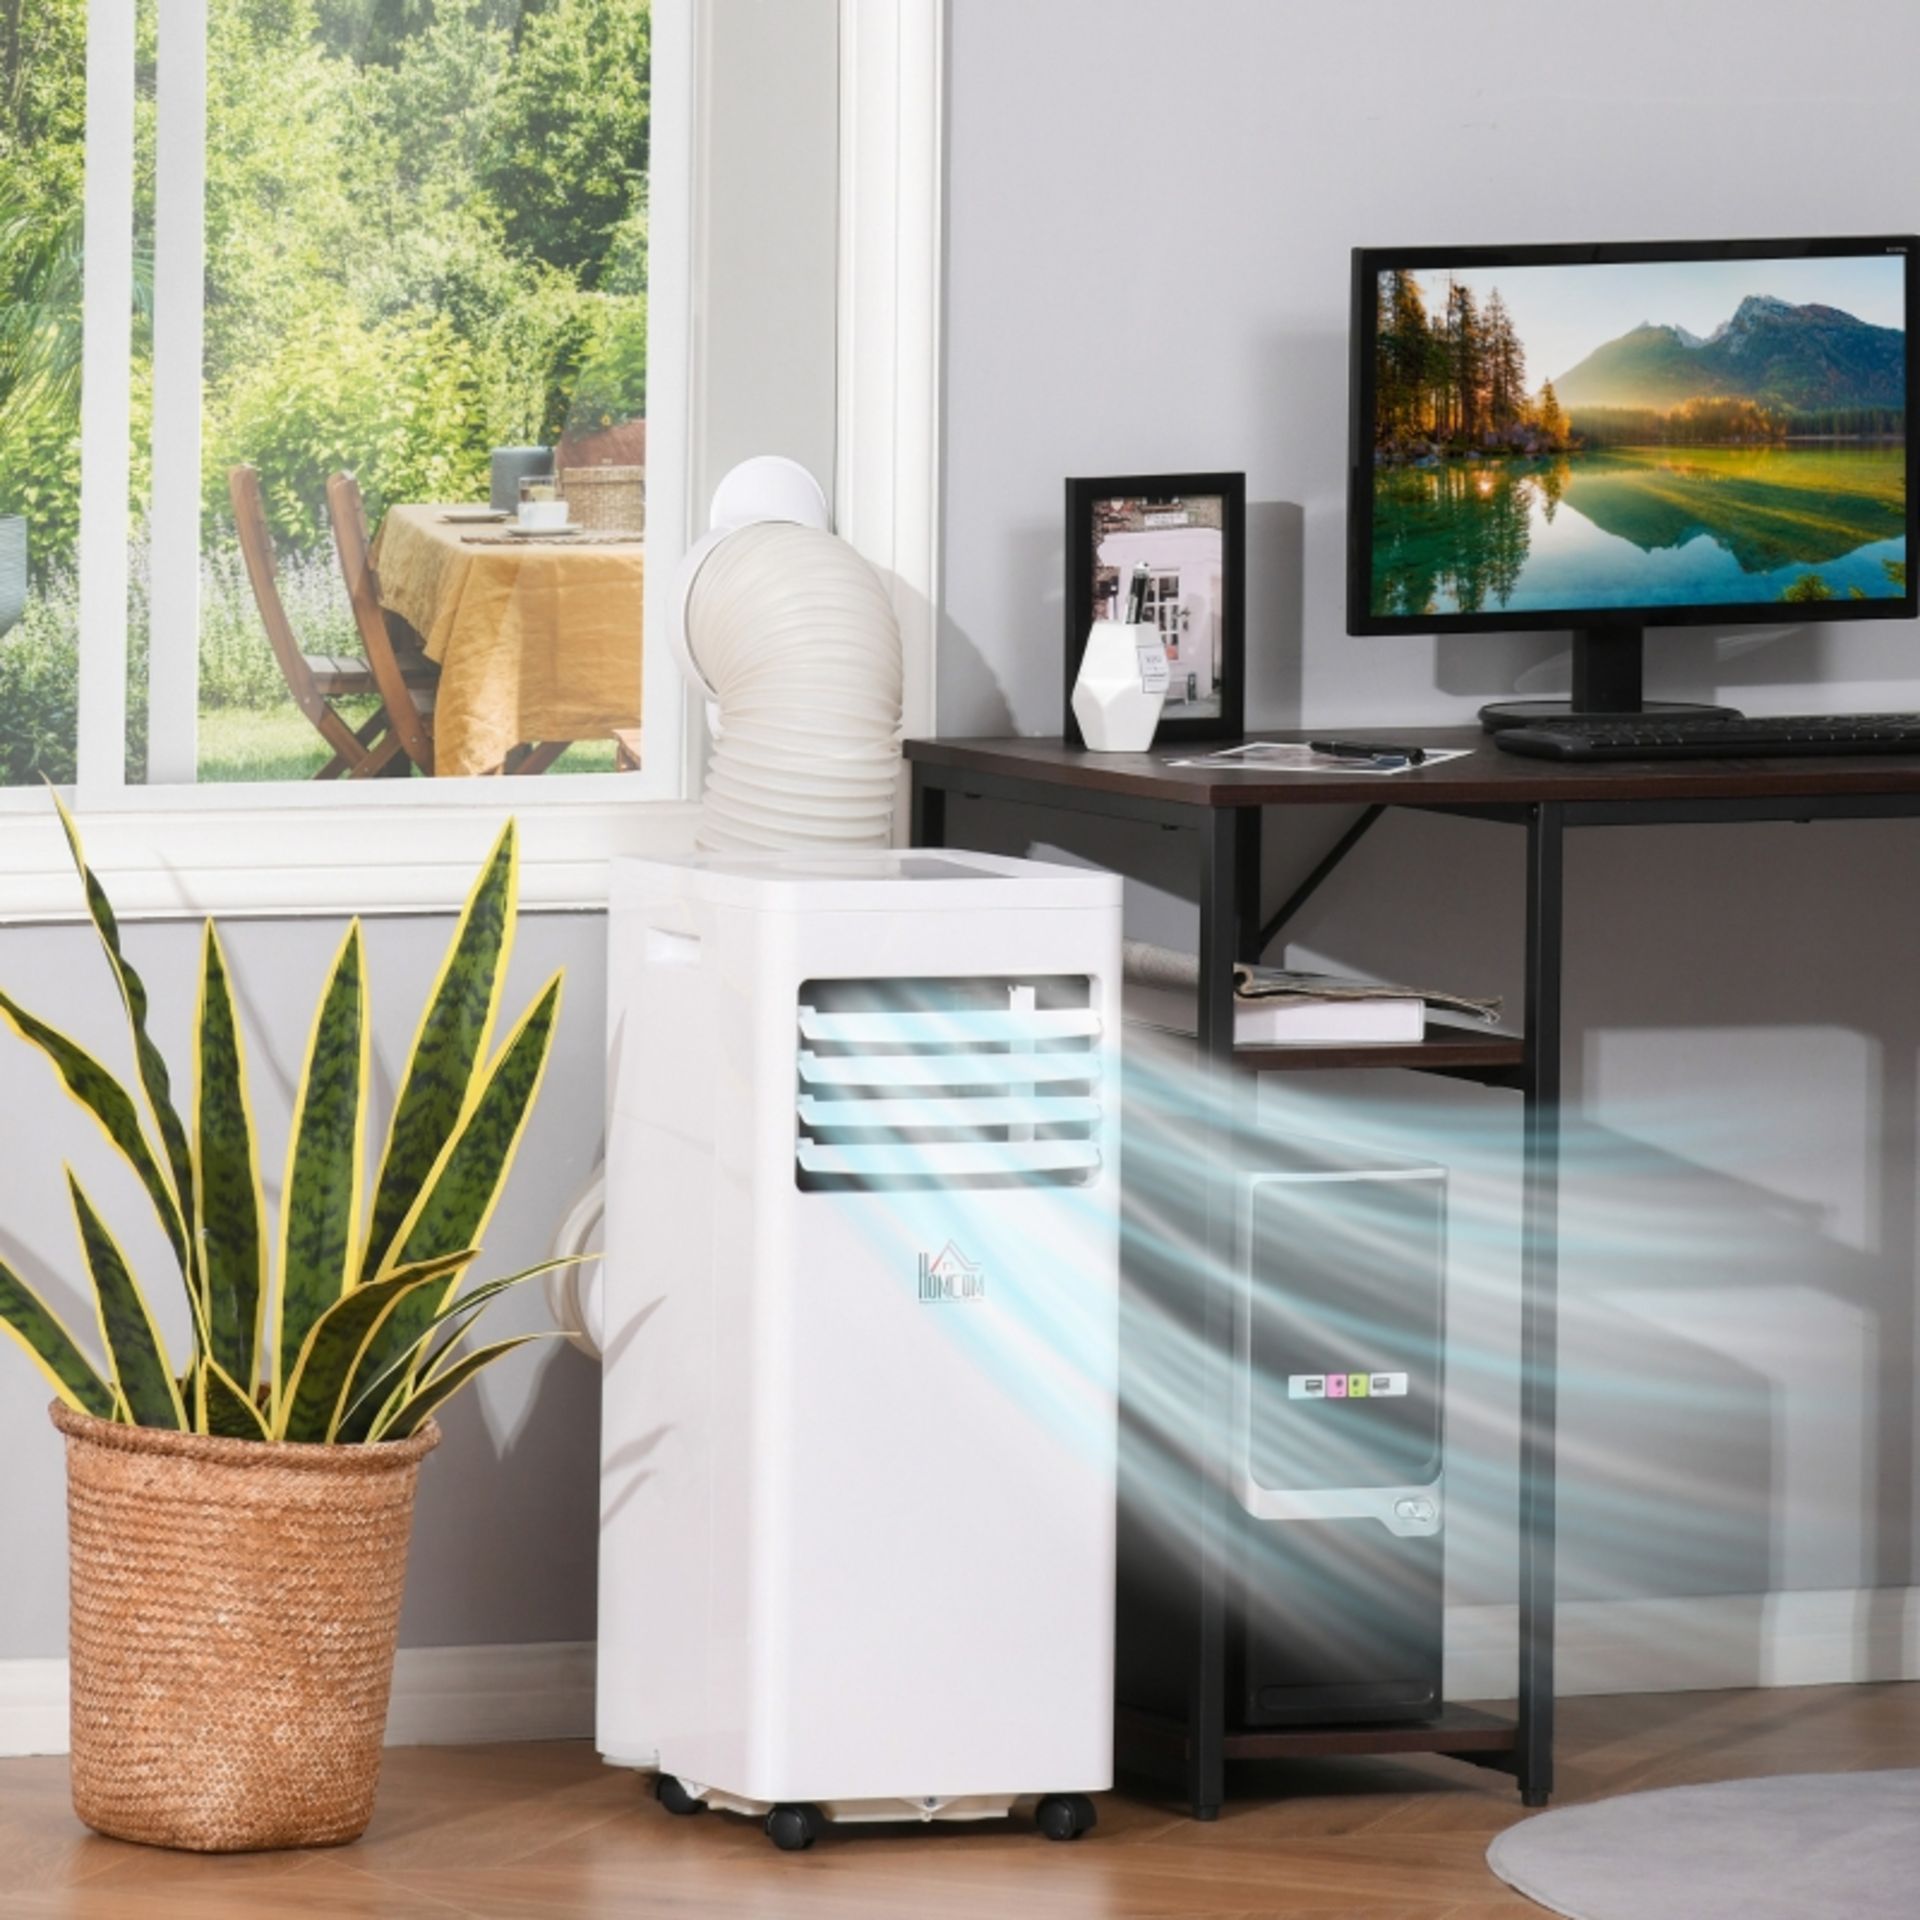 RPP £259.99 -HOMCOM Mobile Air Conditioner White W/ Remote Control Cooling Dehumidifying Ventilating - Image 2 of 4